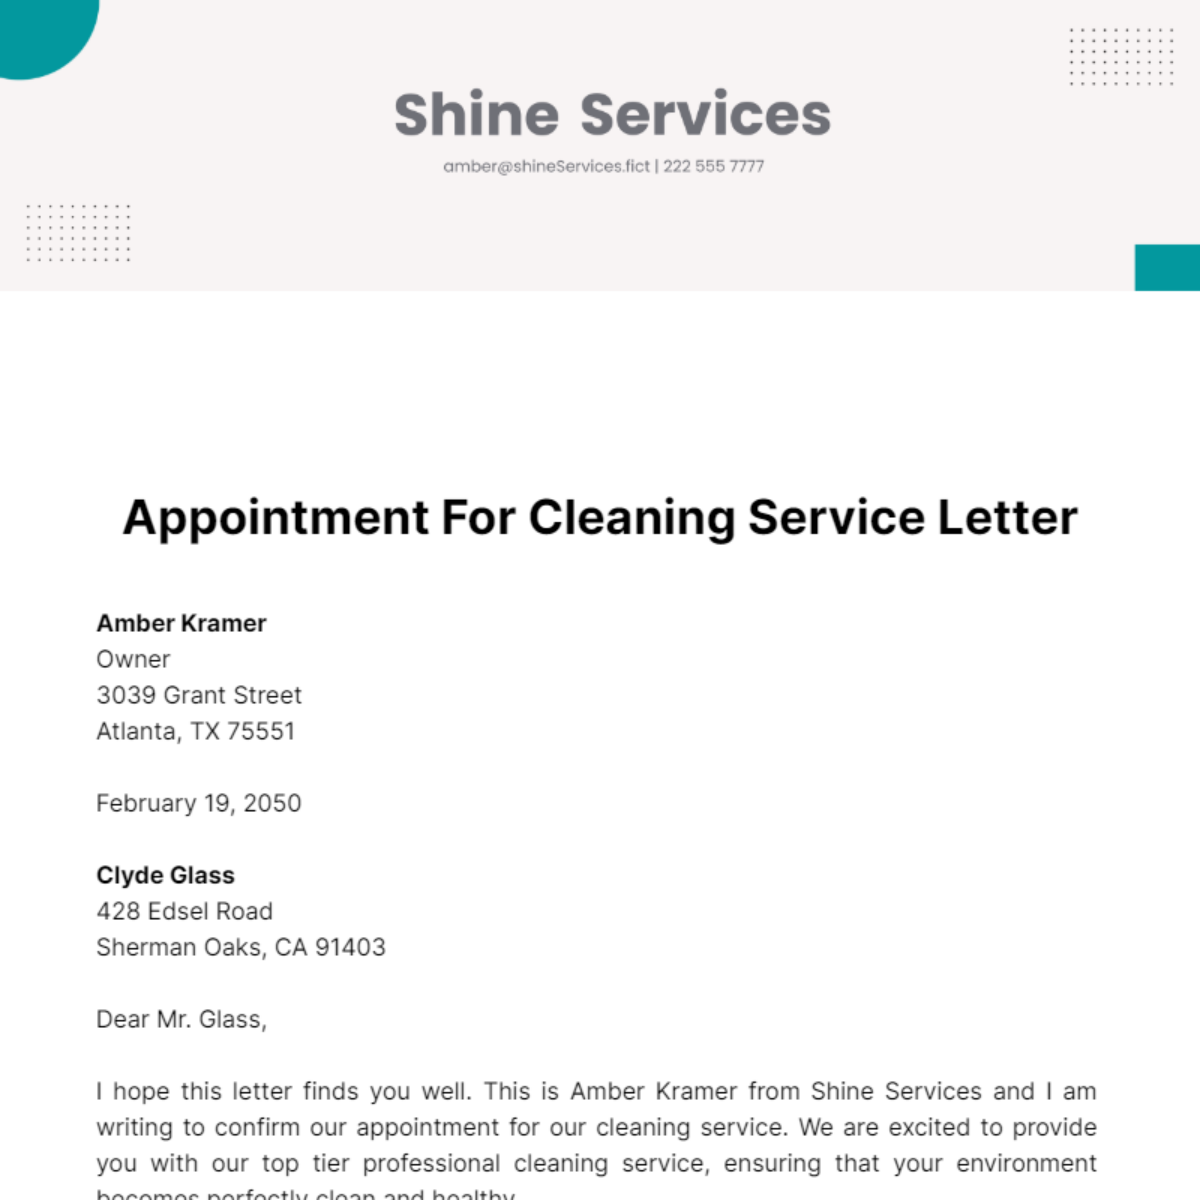 Appointment for Cleaning Service Letter Template